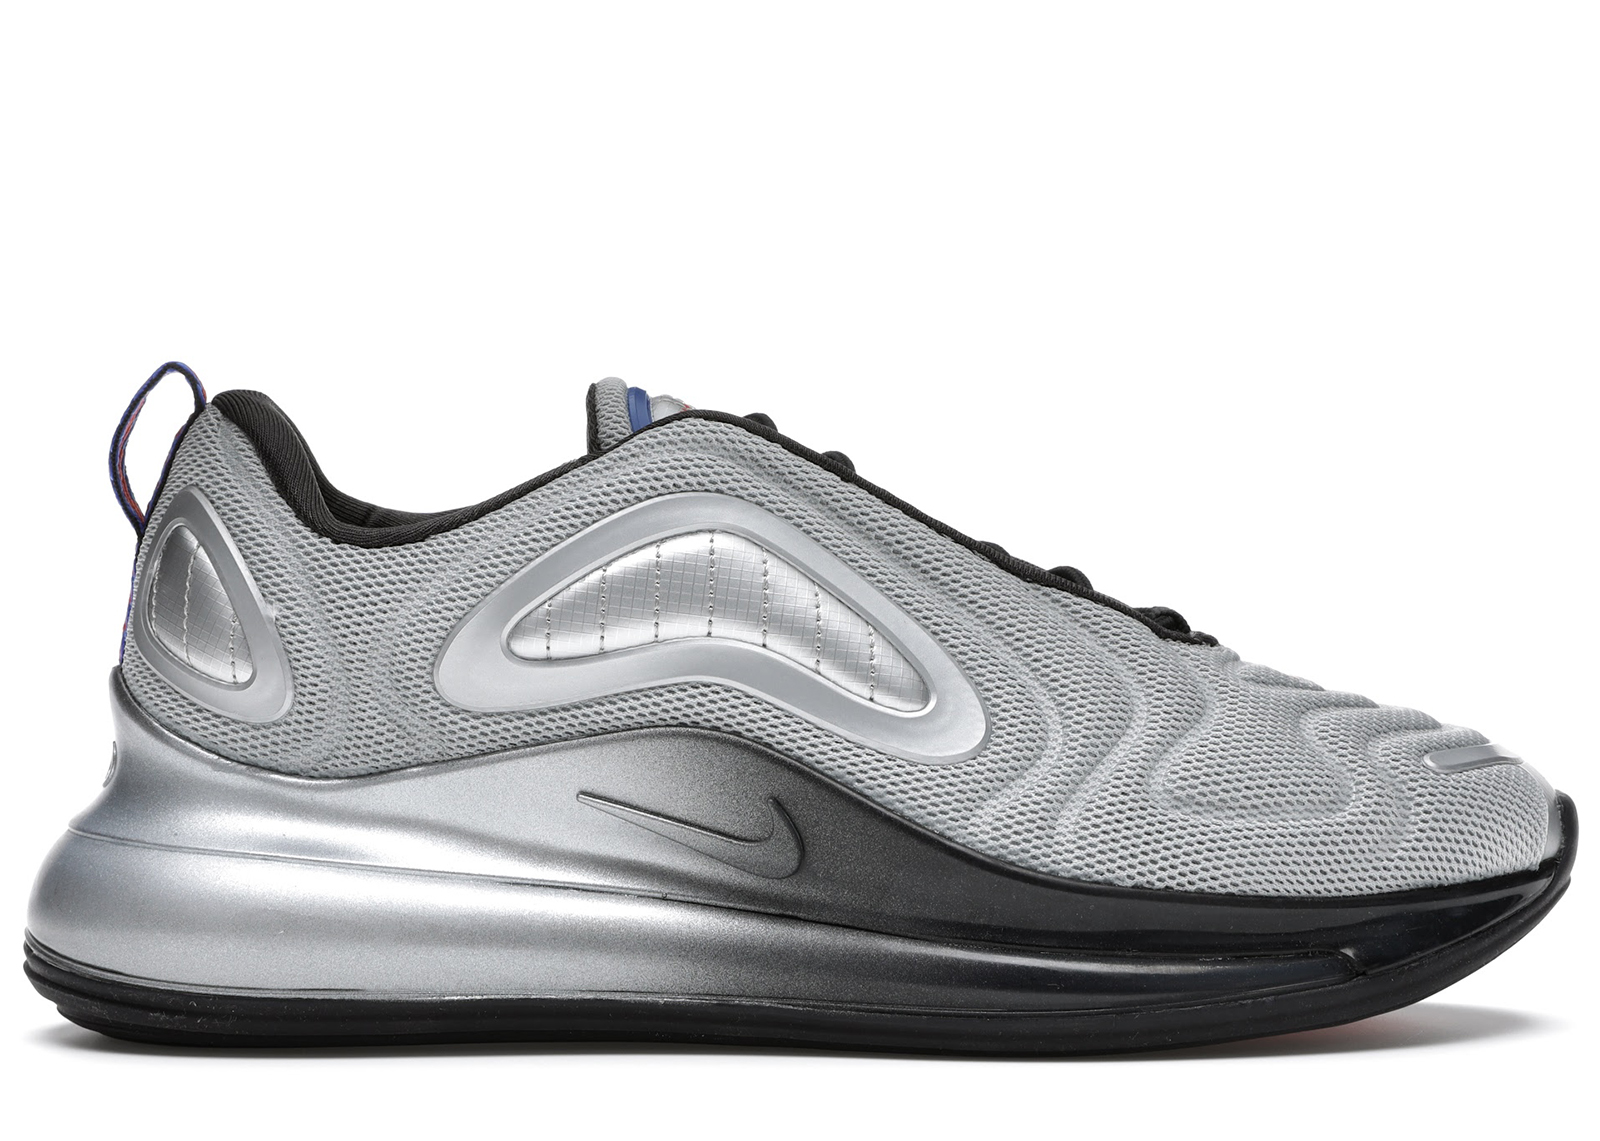 Buy Nike Air Max 720 Shoes & New Sneakers - StockX